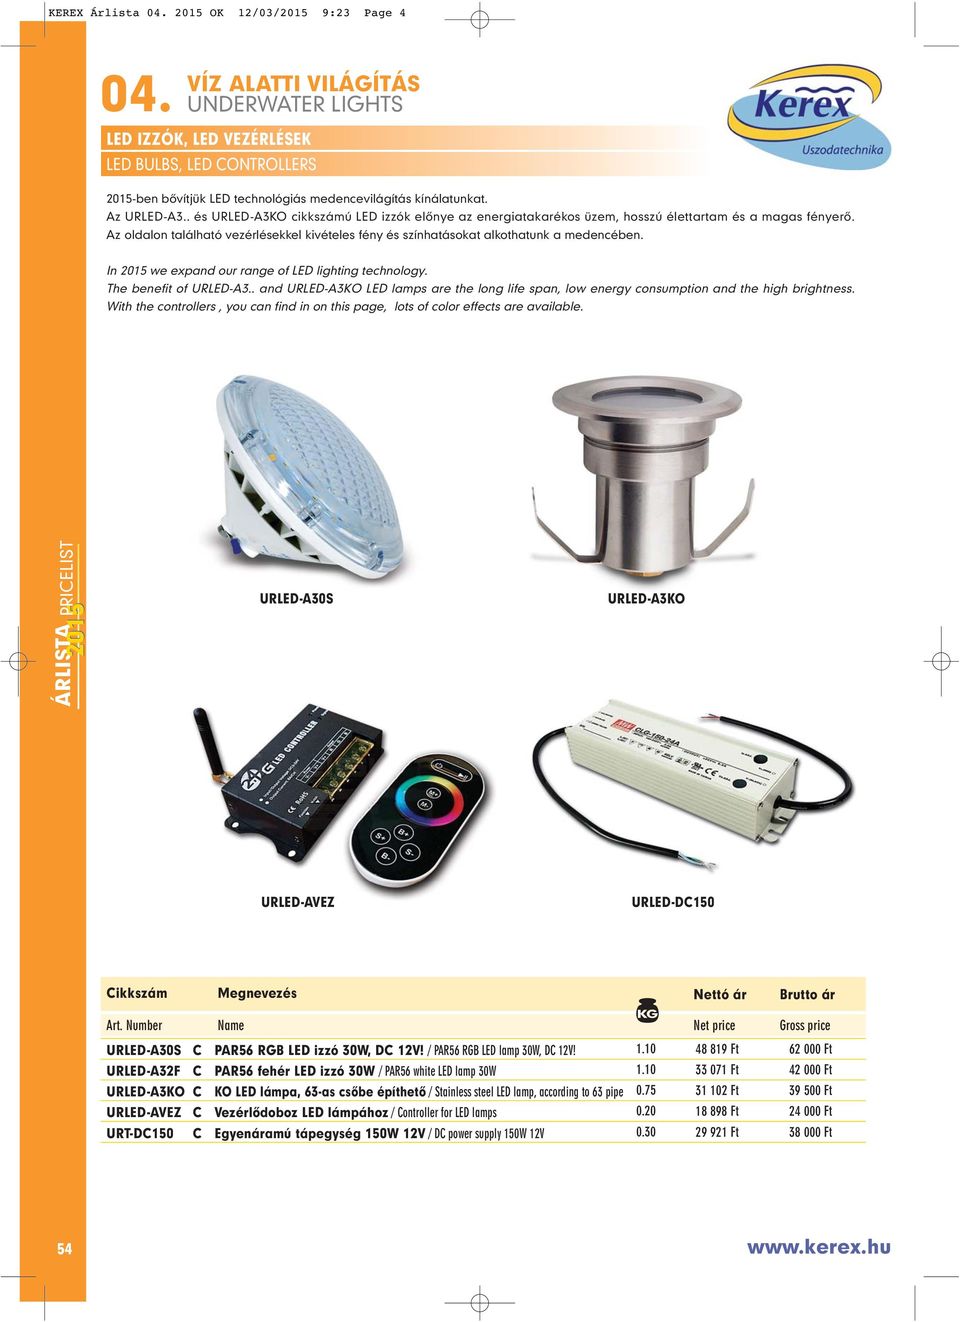 In 2015 we expand our range of LED lighting technology. The benefit of URLED-A3.. and URLED-A3KO LED lamps are the long life span, low energy consumption and the high brightness.